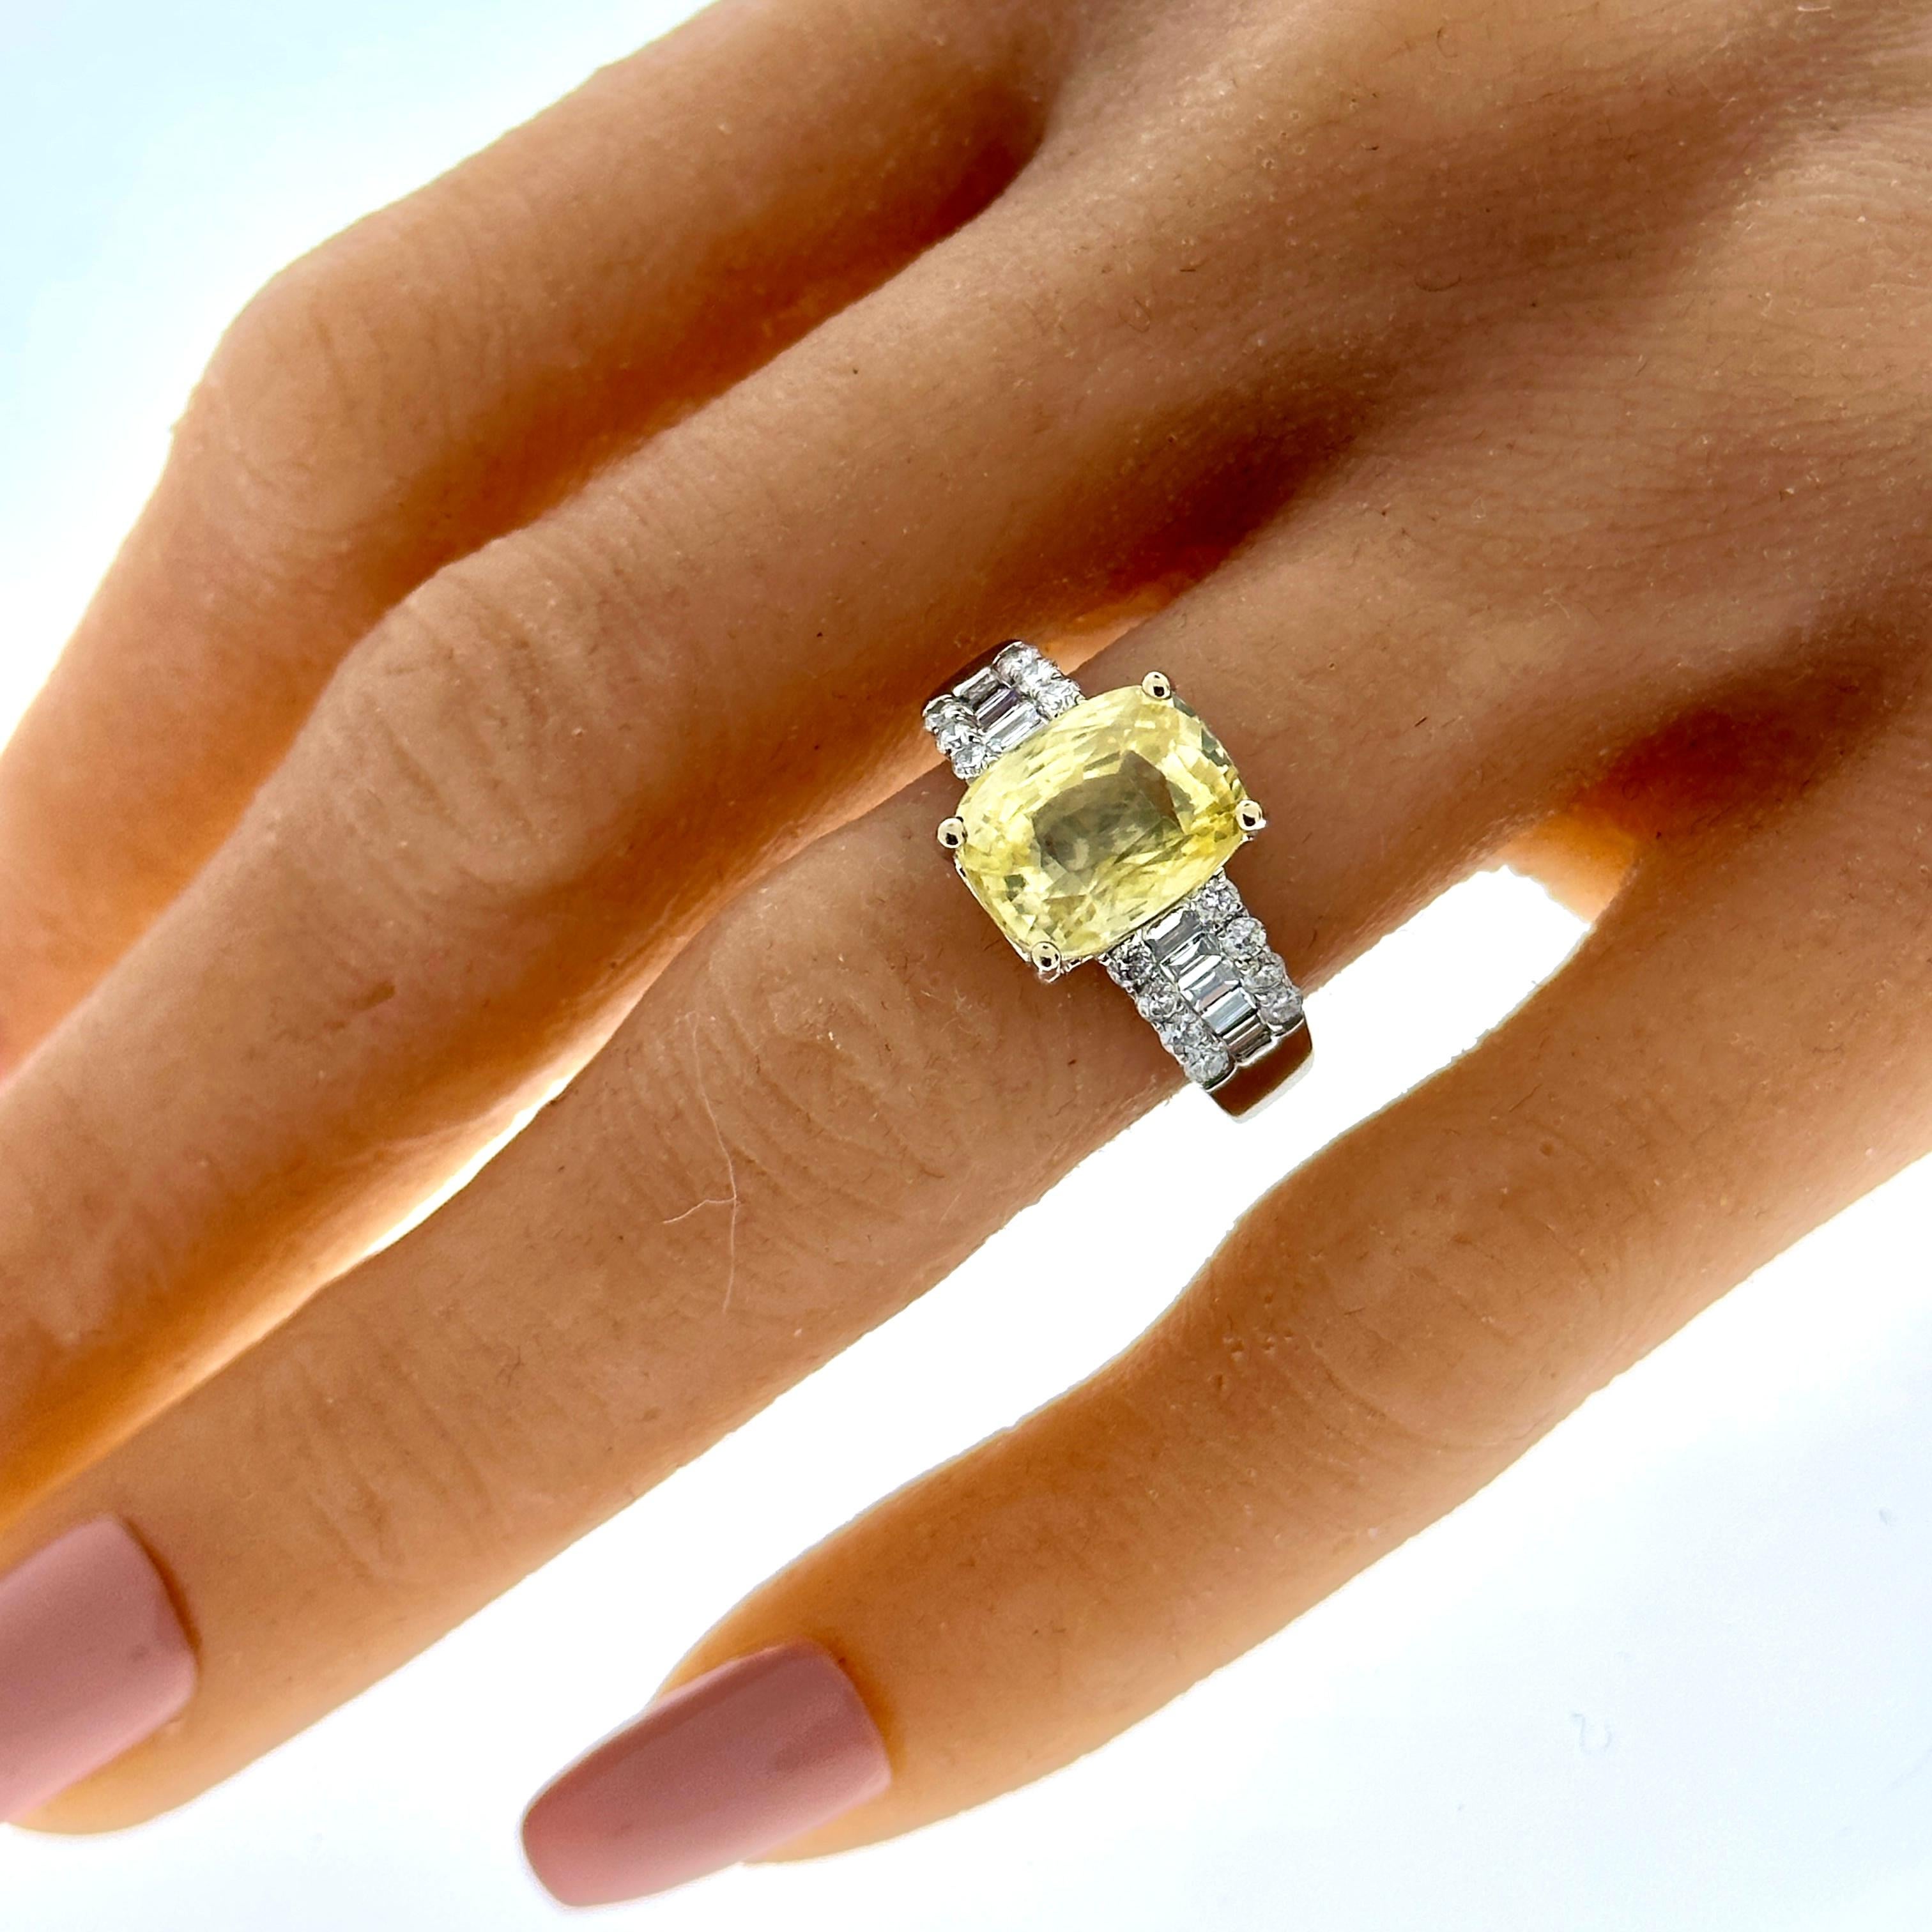 This cocktail halo ring is dripping with vibrancy and scintillation. An 5.87 carat square cushion cut, natural vivid yellow sapphire is obviously notable. The gem source is Sri Lanka; its transparency and luster are excellent. Its color is evenly